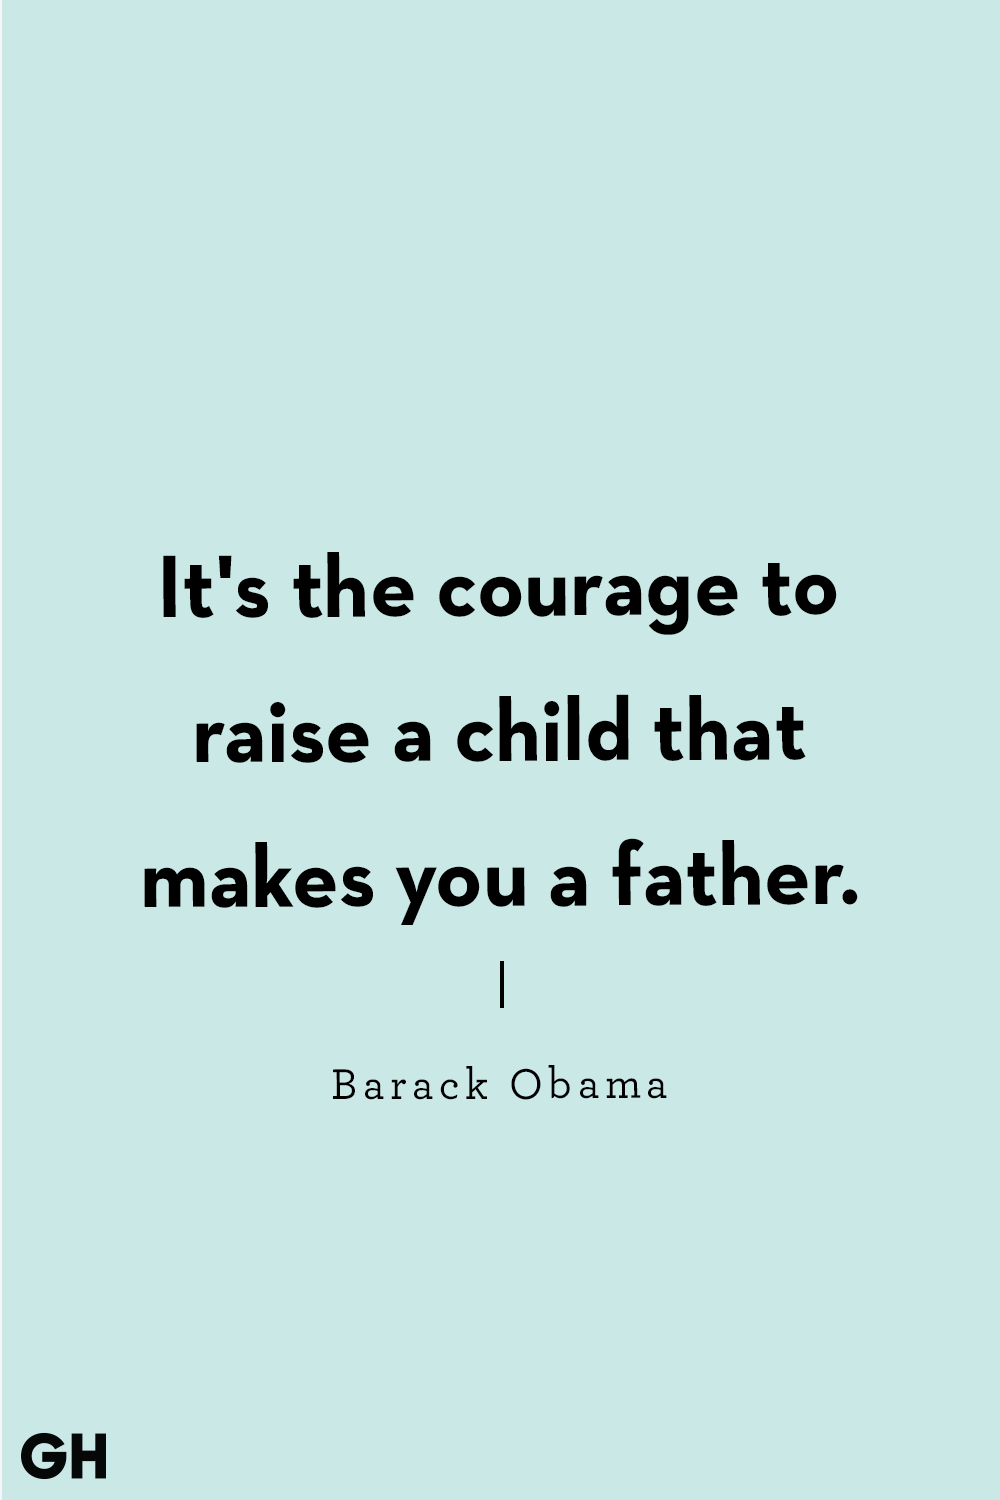 its the courage to raise a child that makes you a father. barack obama